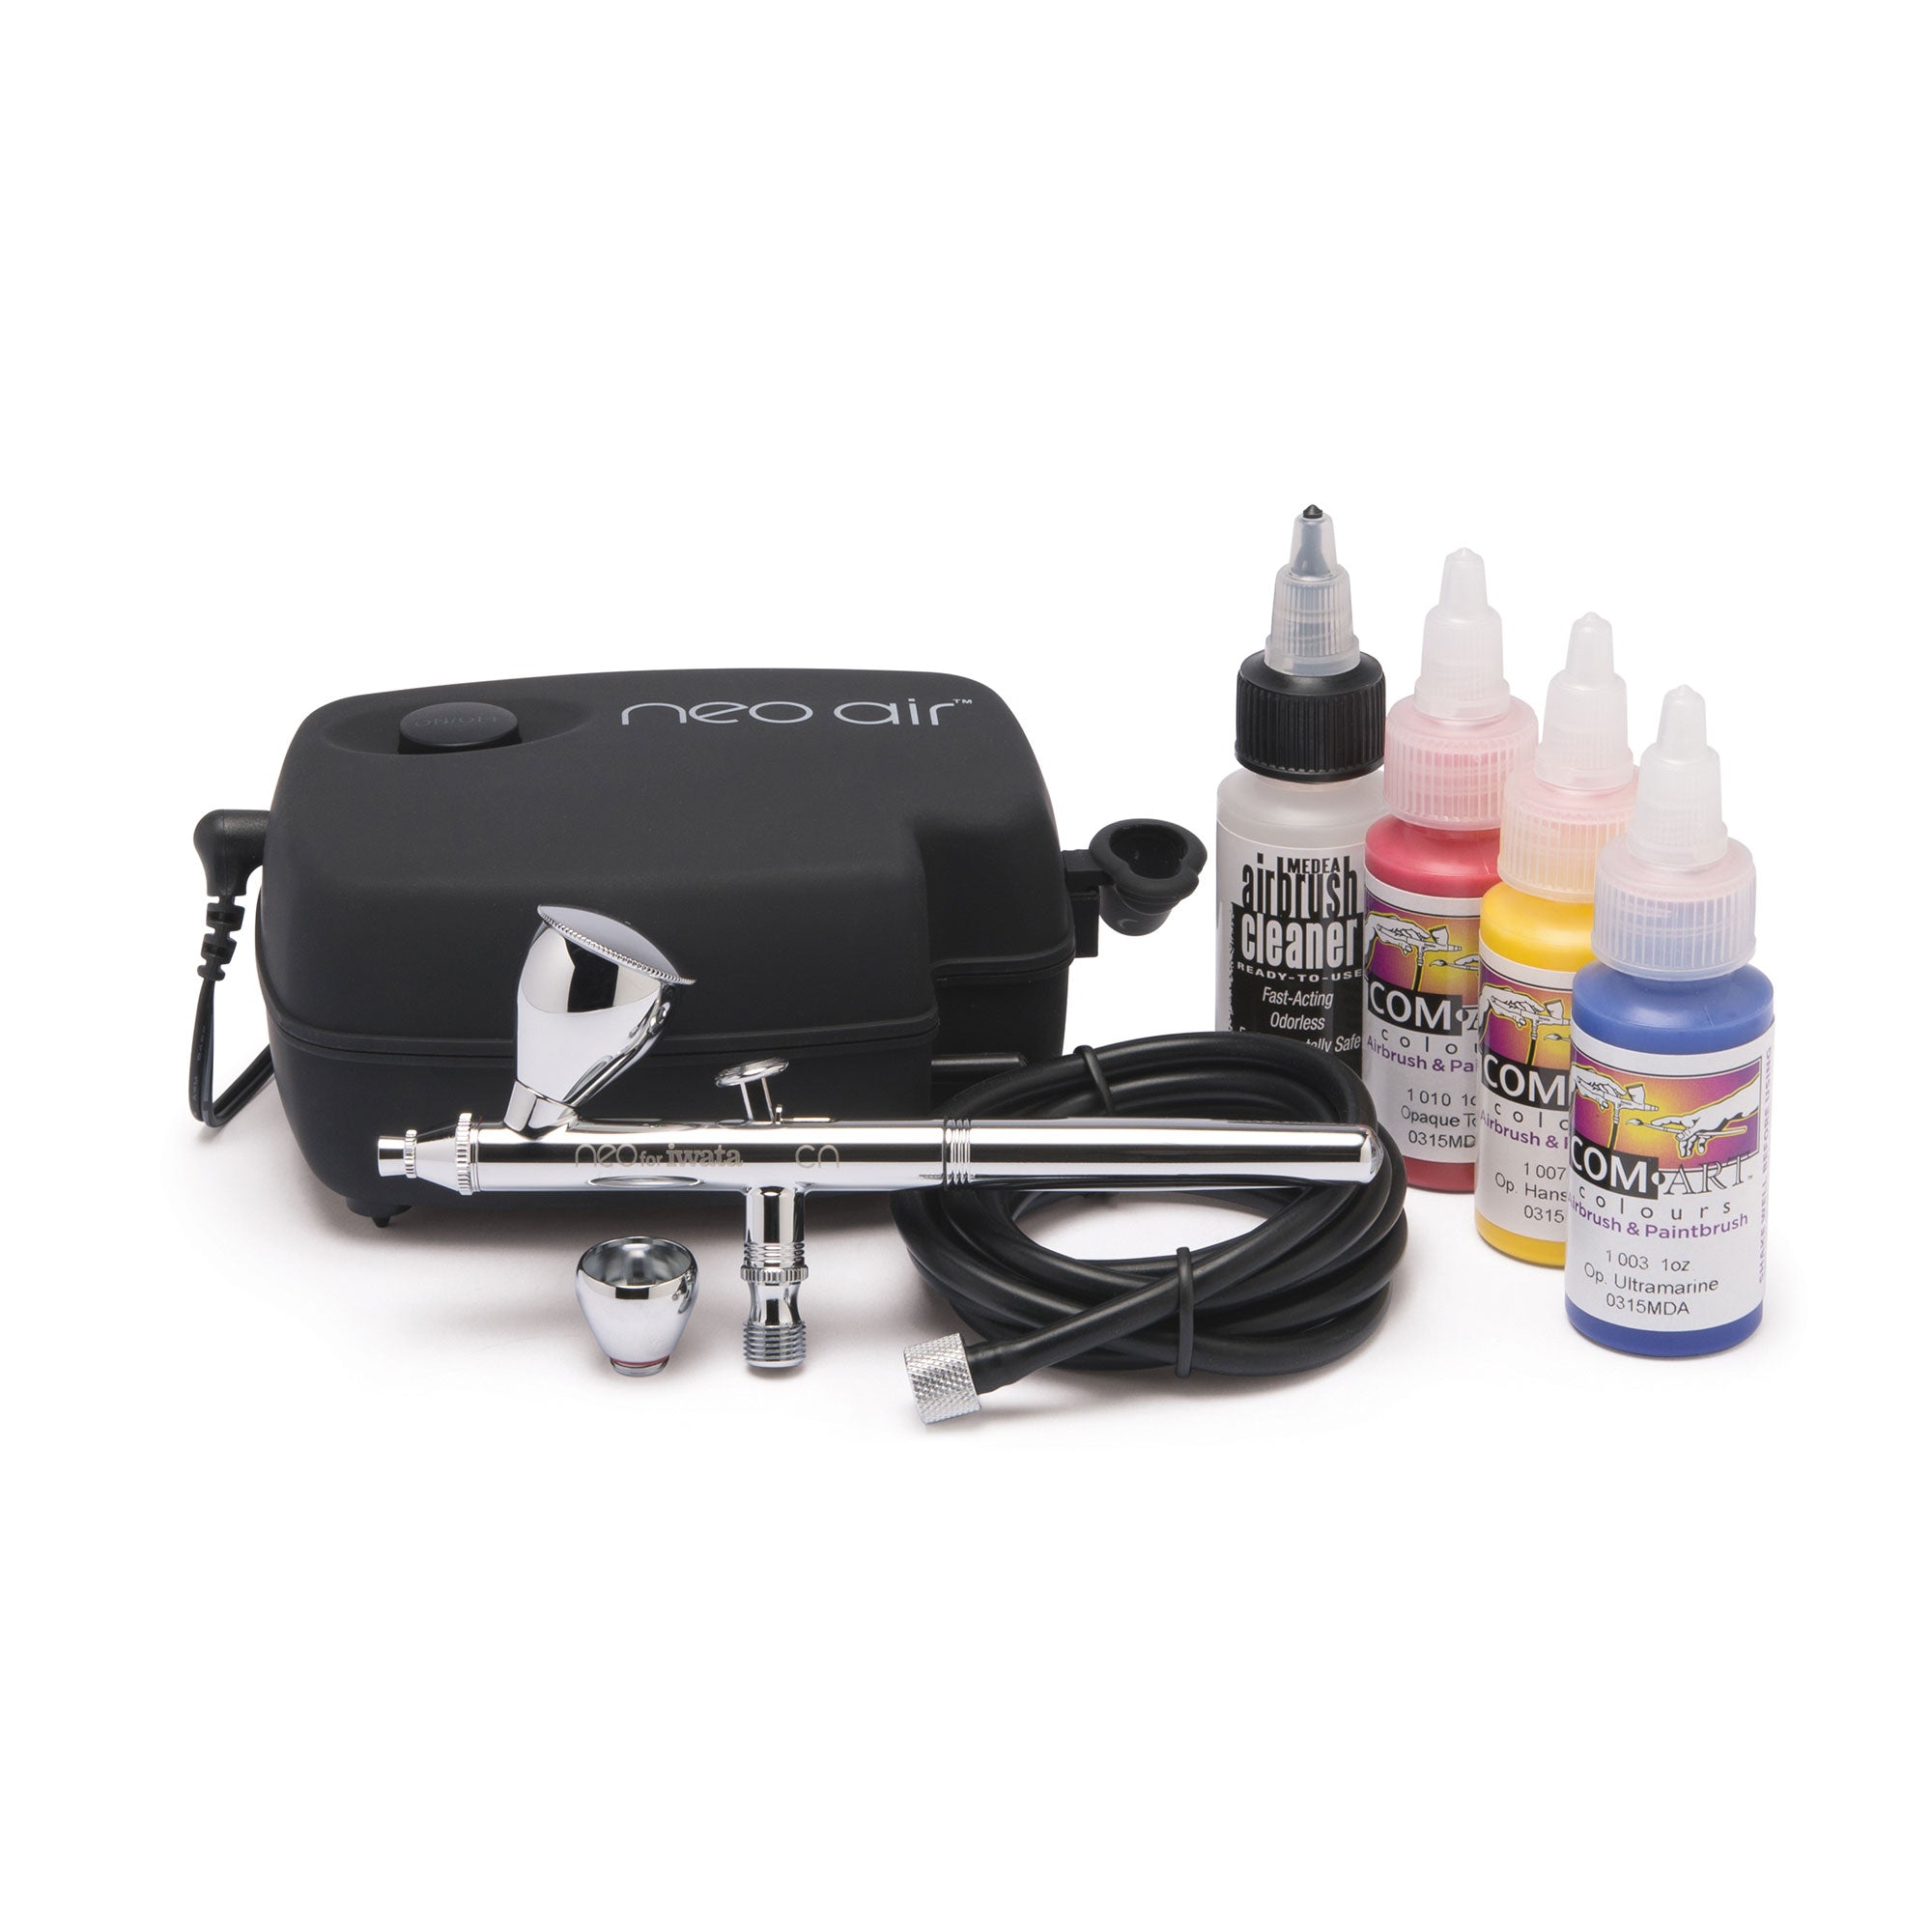 Iwata Airbrush Cleaning Kit and Refill